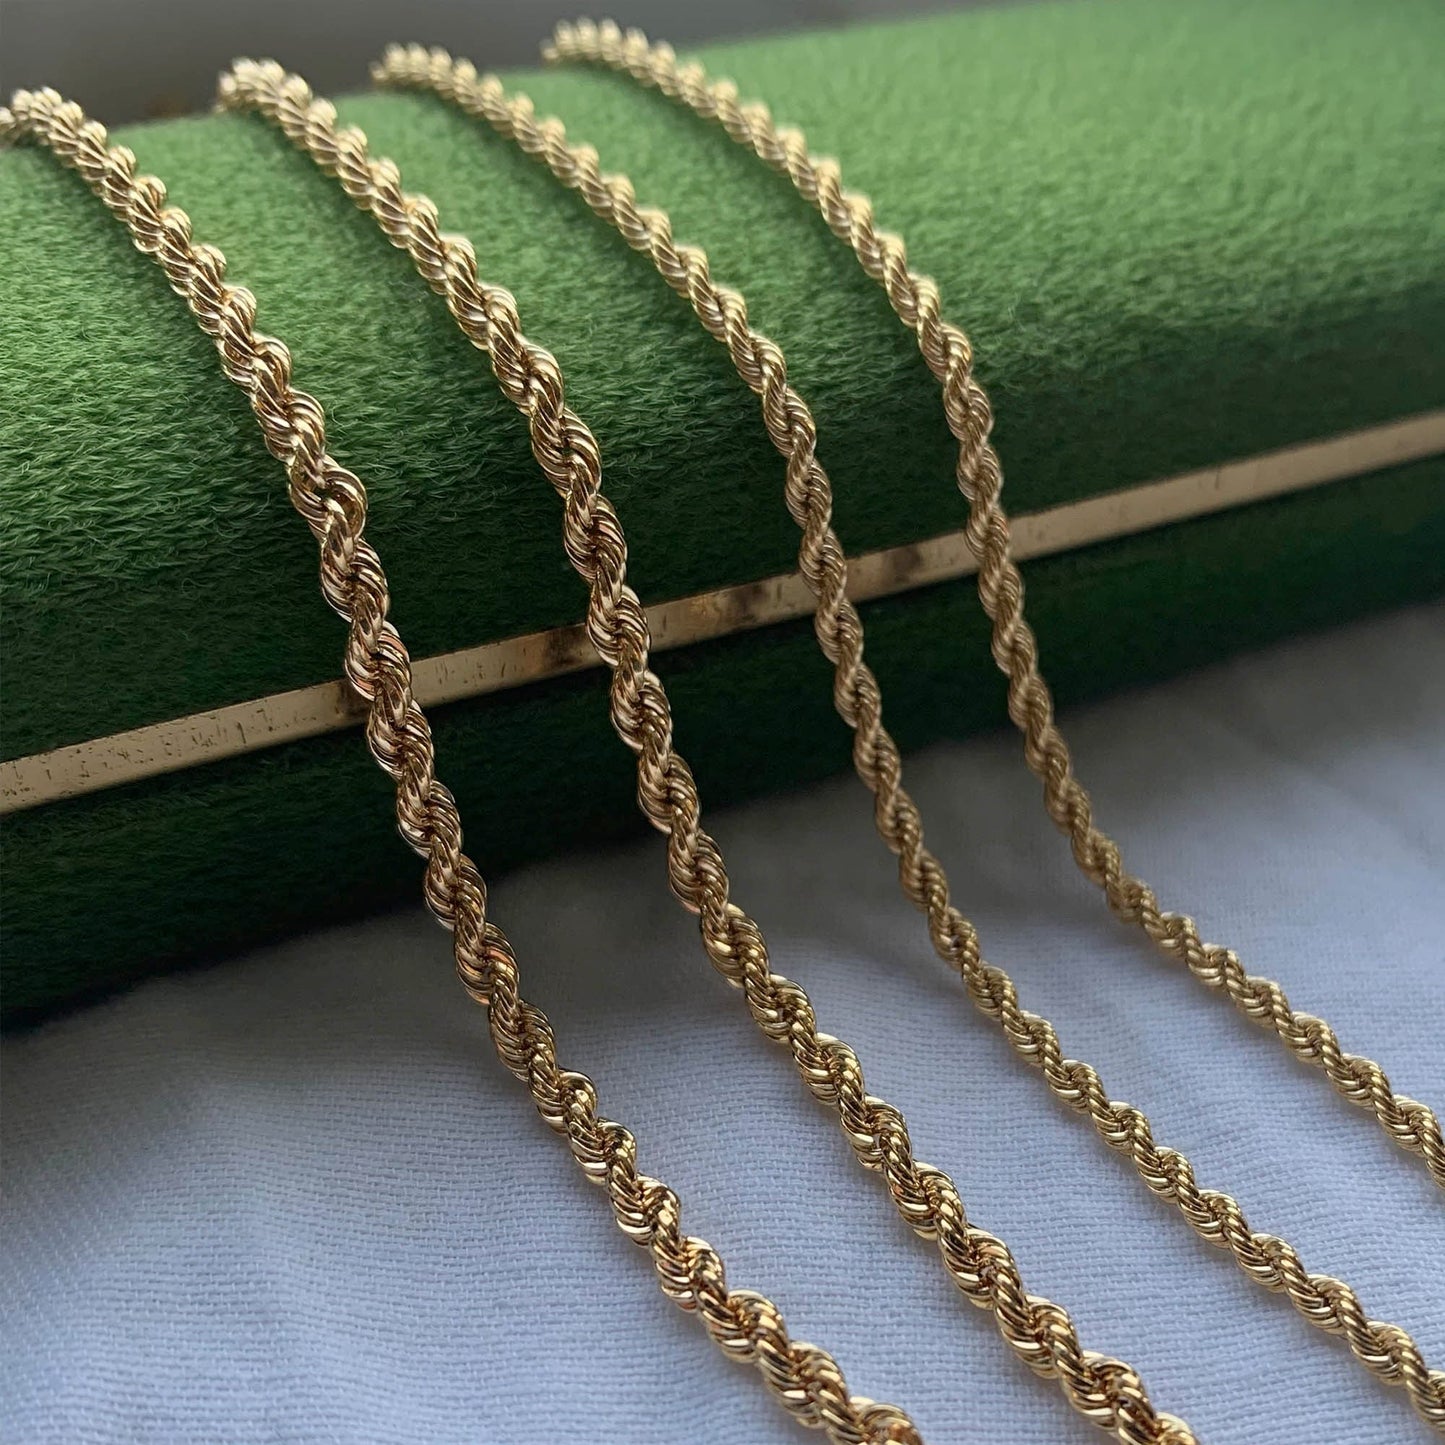 FOUR STRANDS OF ROPE CHAIN STYLED OVER A DARK GREEN JEWELLERY BOX.